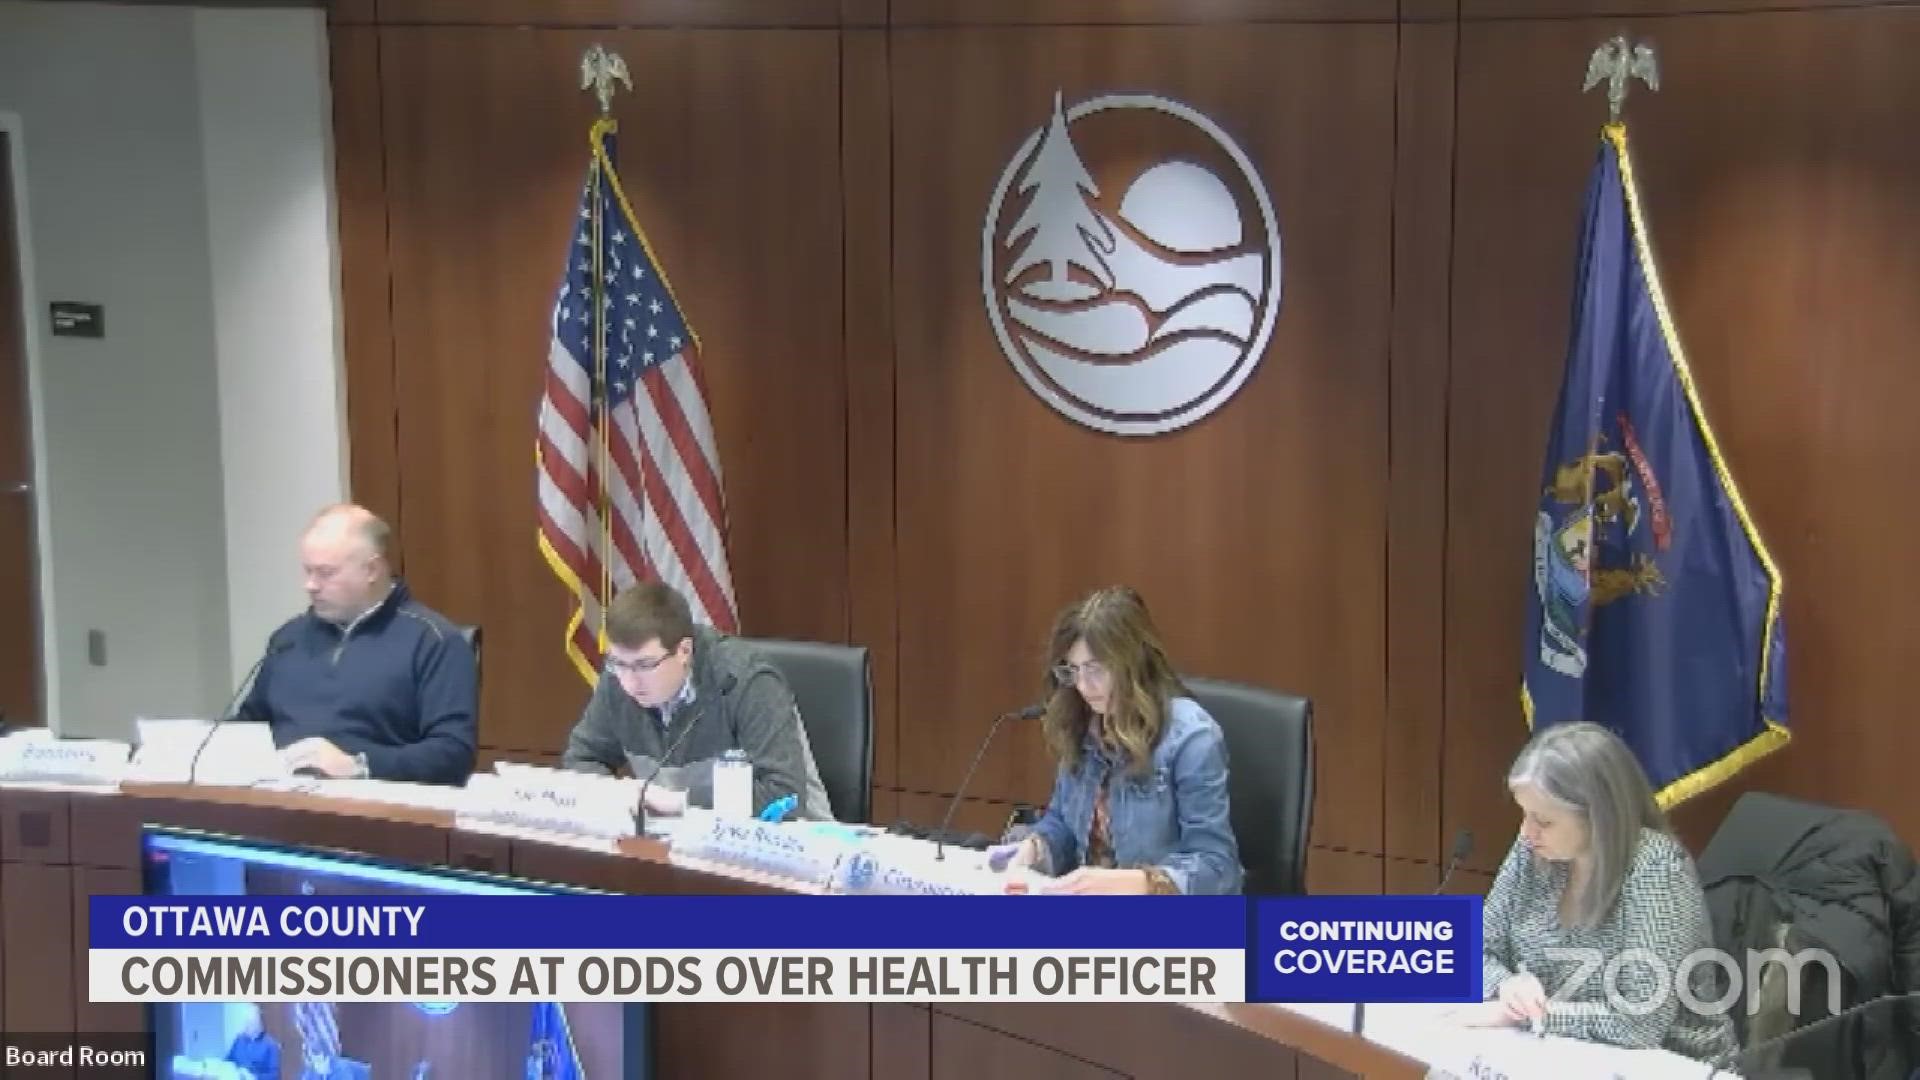 During this week's Health & Human Services Committee meeting, it was asked about whether their pick for Health officer, Nathaniel Kelly,  is going to get the job.